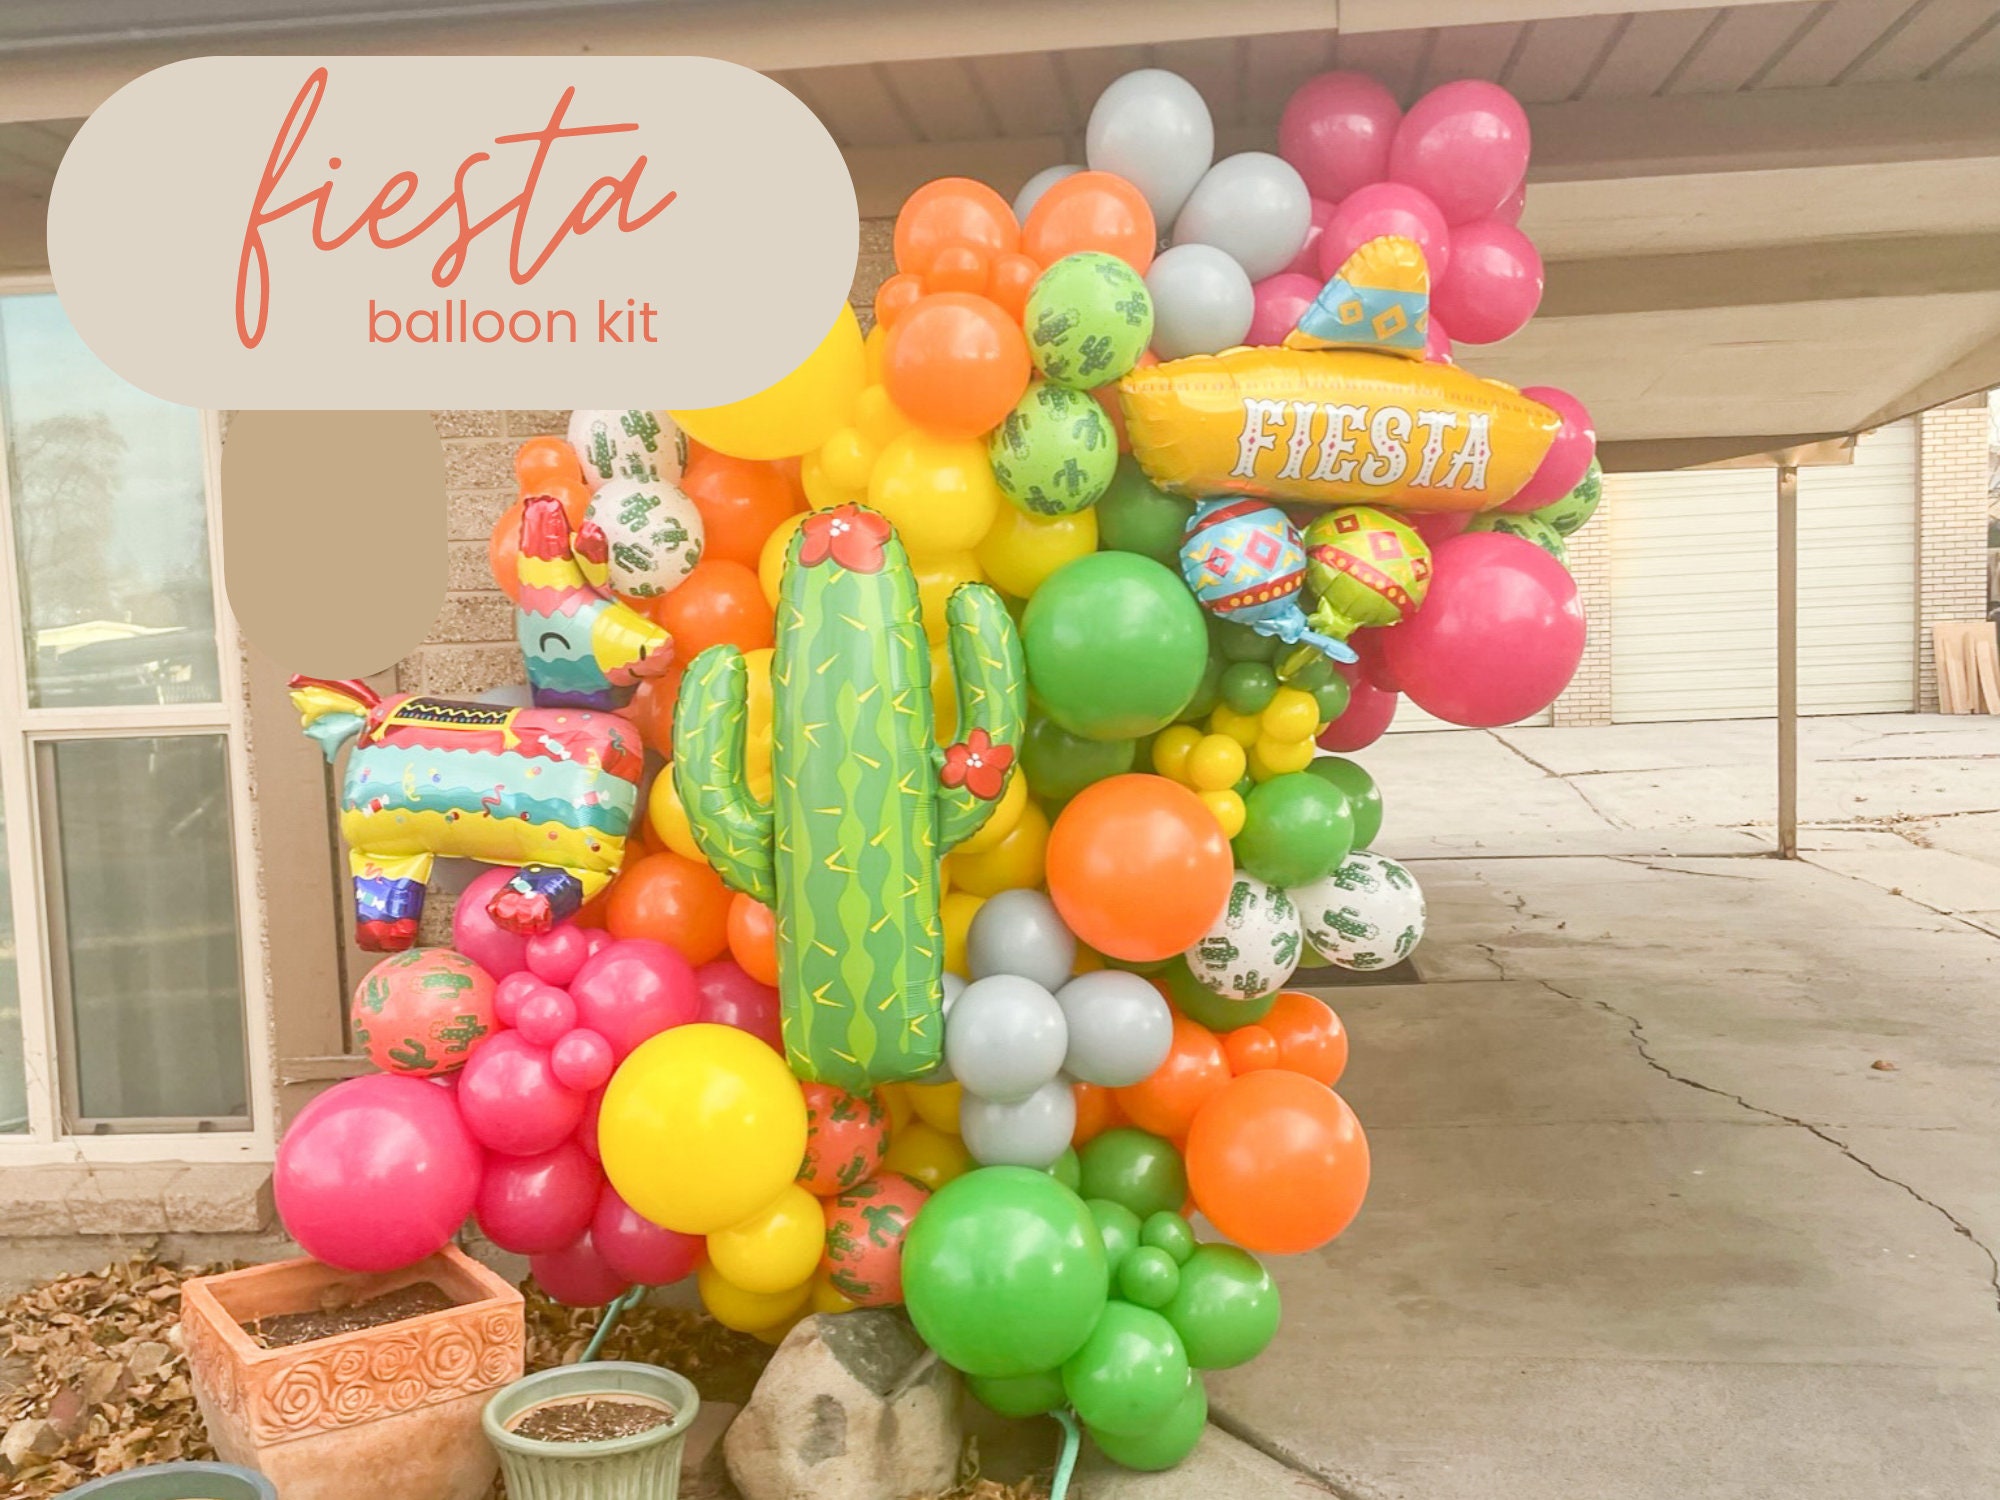  119 Pcs Fiesta Balloon Garland Arch Kit Mexican Fiesta Theme  Party Backdrop Paper Fans Taco Foil Balloons Cinco De Mayo Party Decorations  for Mexican Theme Party Wedding Baby Bridal Shower Birthday 